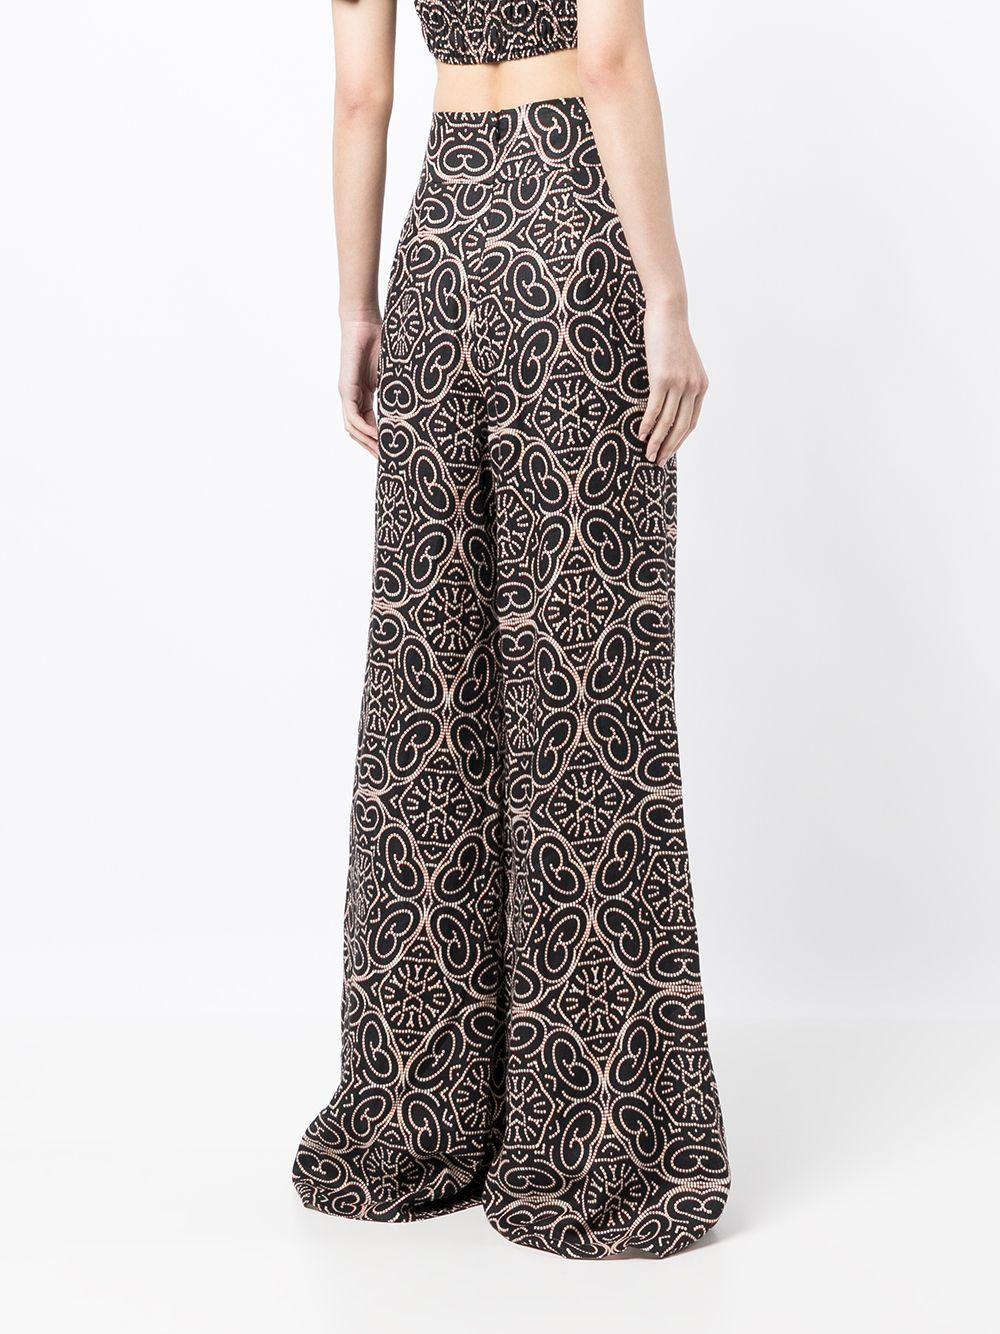 Shop Alexis geometric-print wide leg trousers with Express Delivery ...